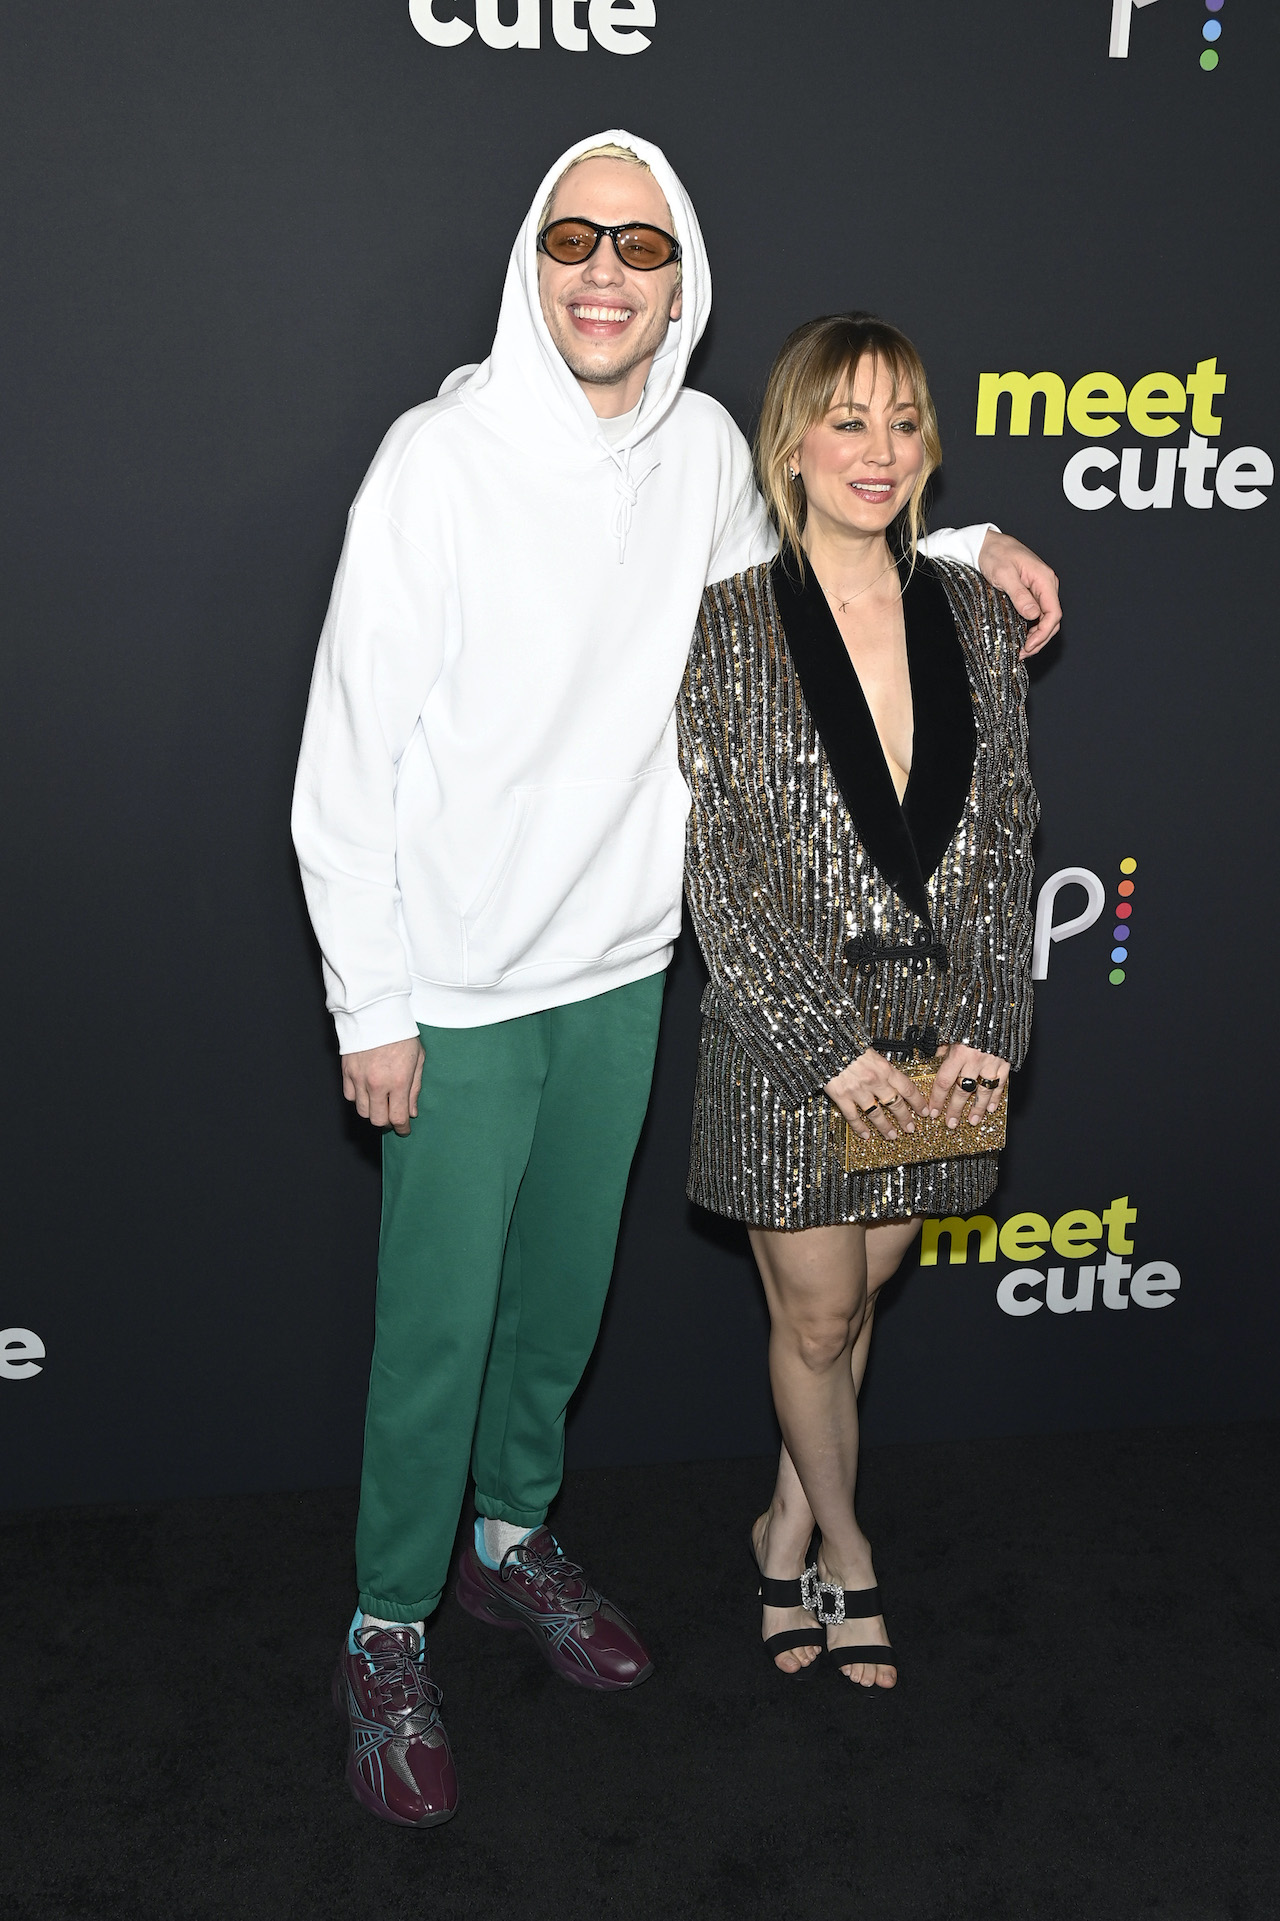 Kaley Cuoco and Pete Davidson on the red carpet